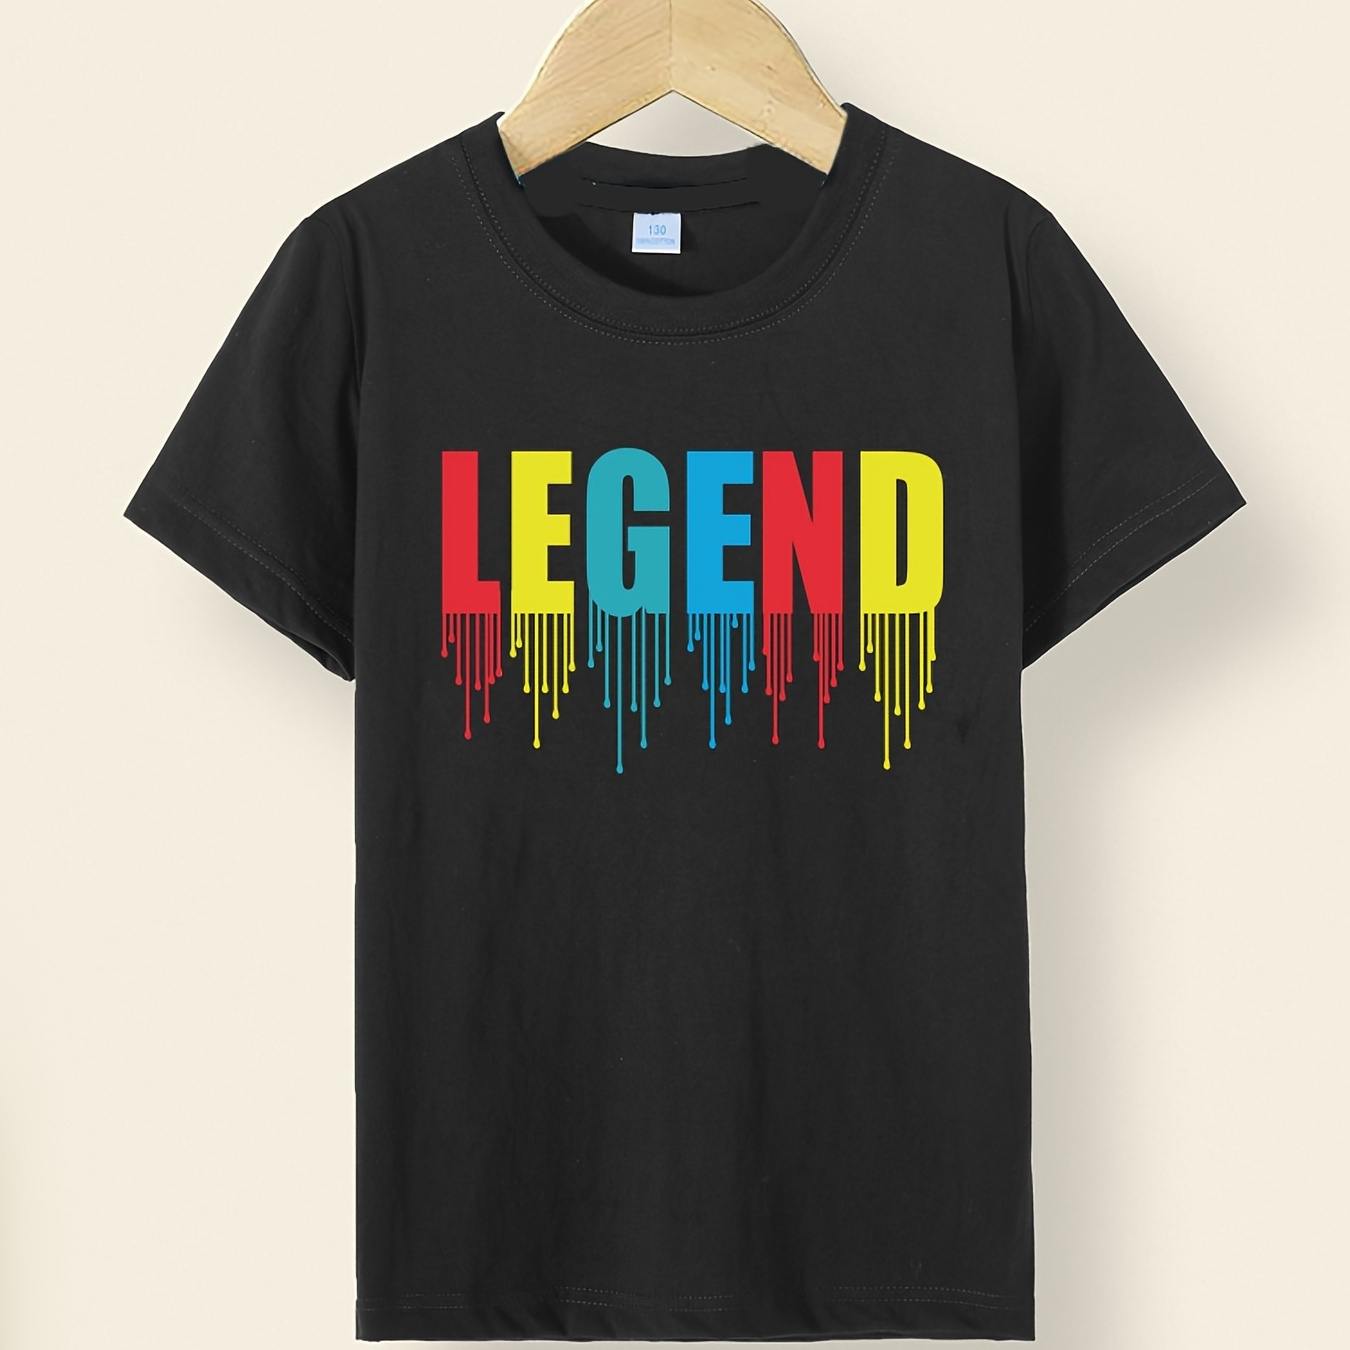 

Stylish Legend Letter Print Boys Creative T-shirt, Casual Lightweight Comfy Short Sleeve Crew Neck Tee Tops, Kids Clothings For Summer